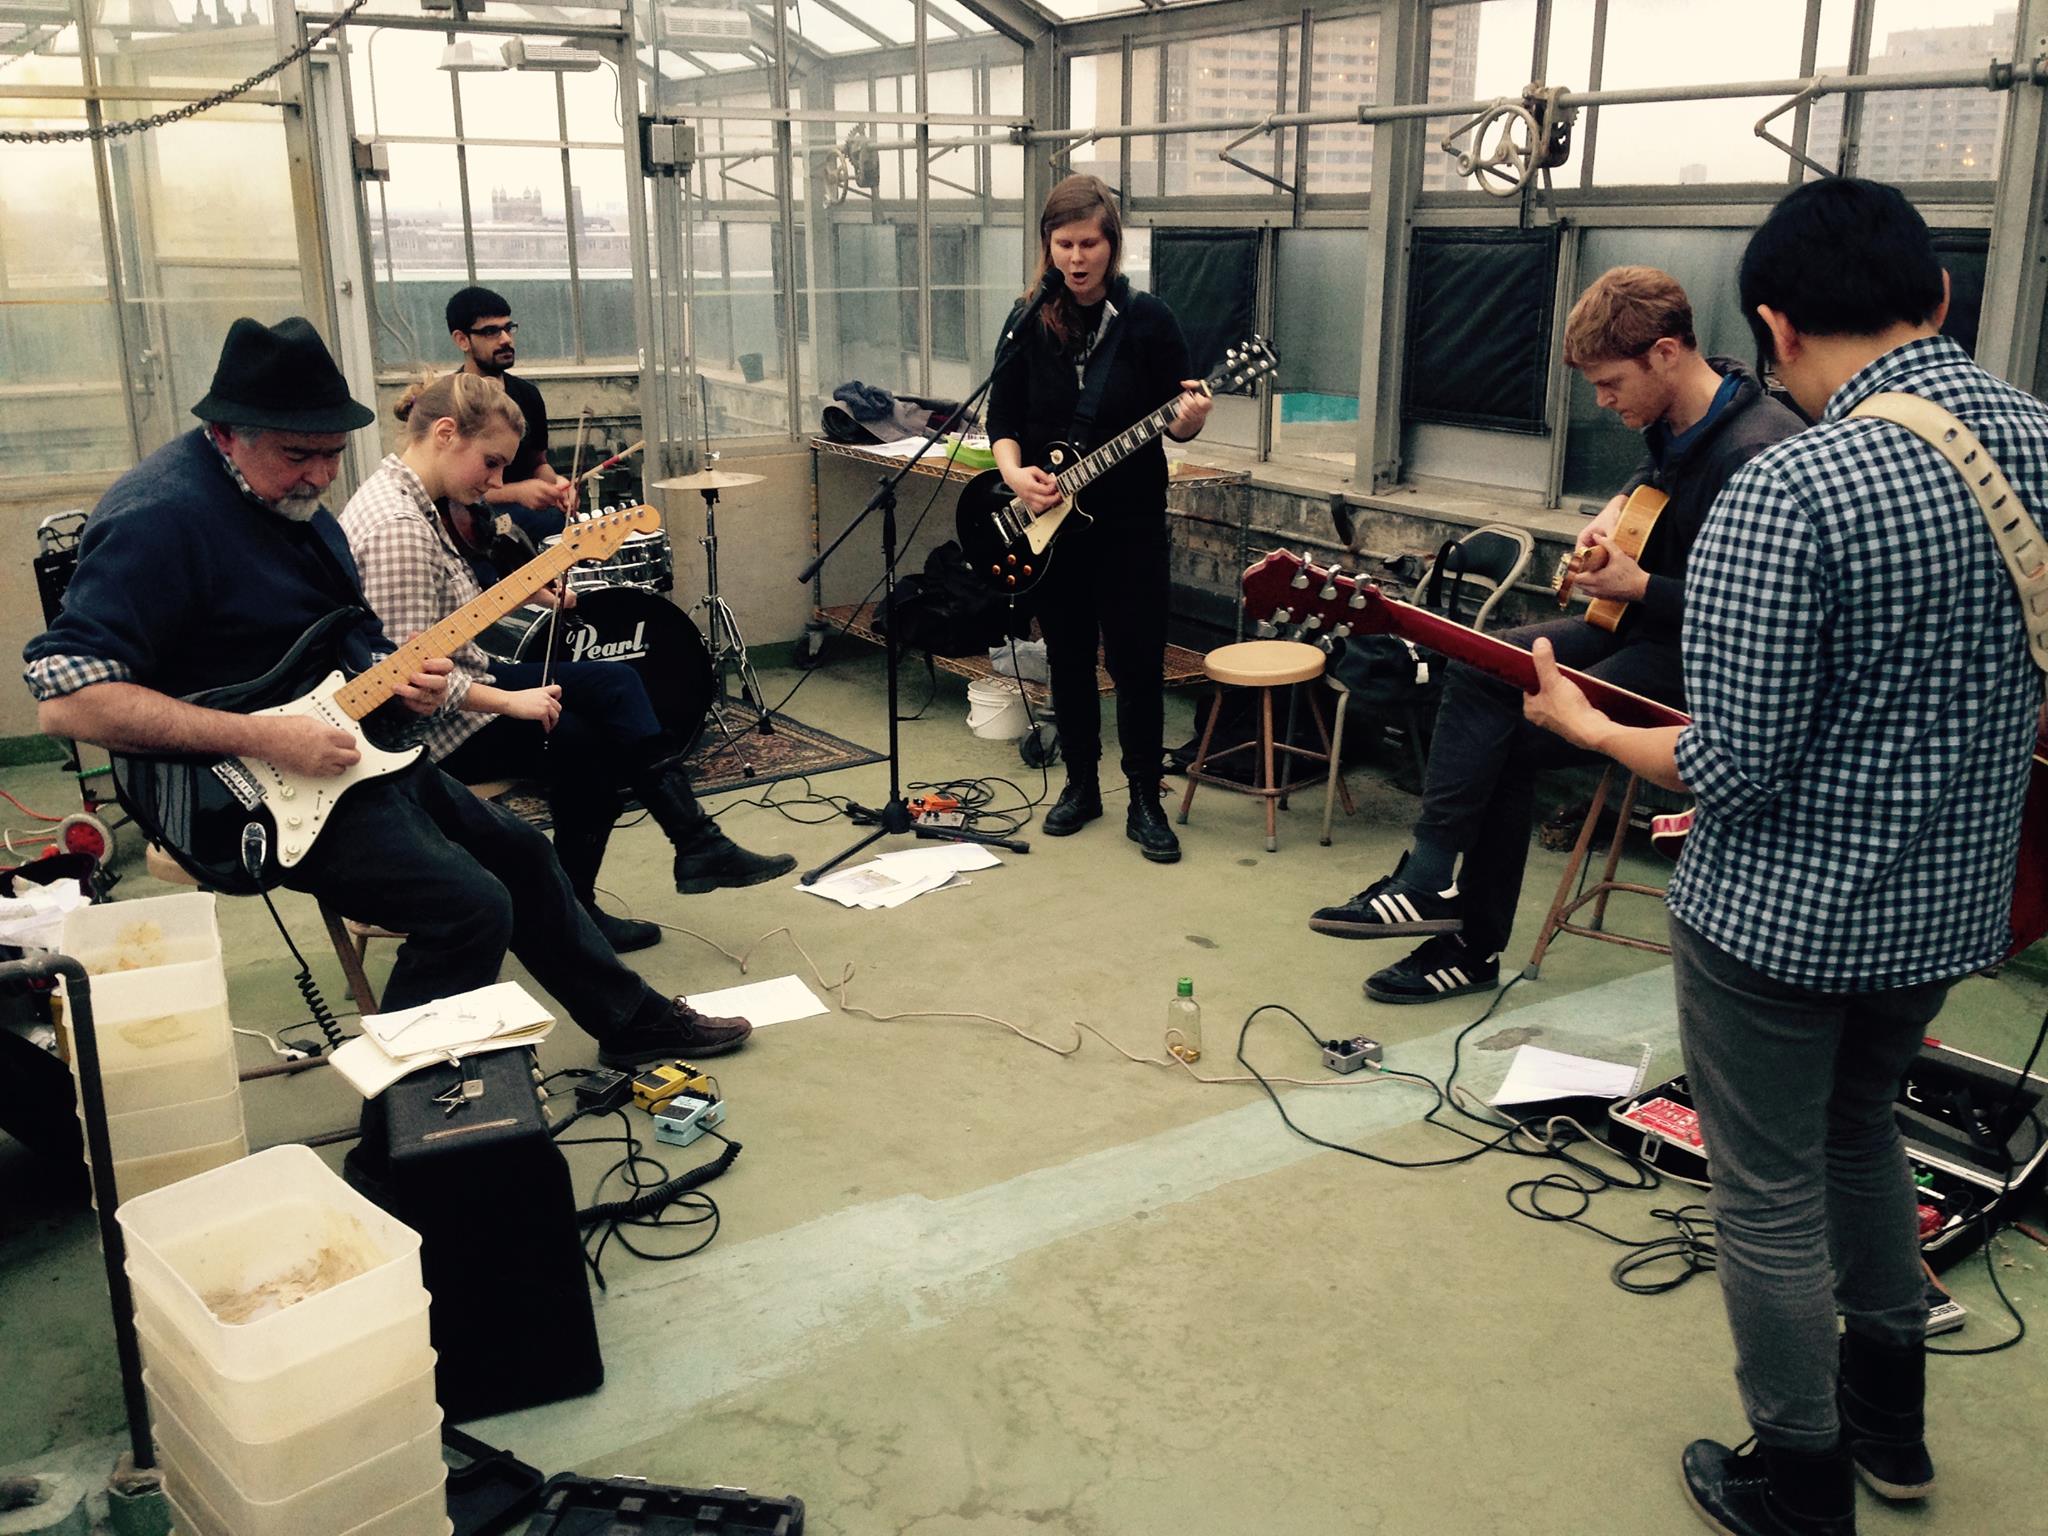 Art jamming with the greenhouse band.